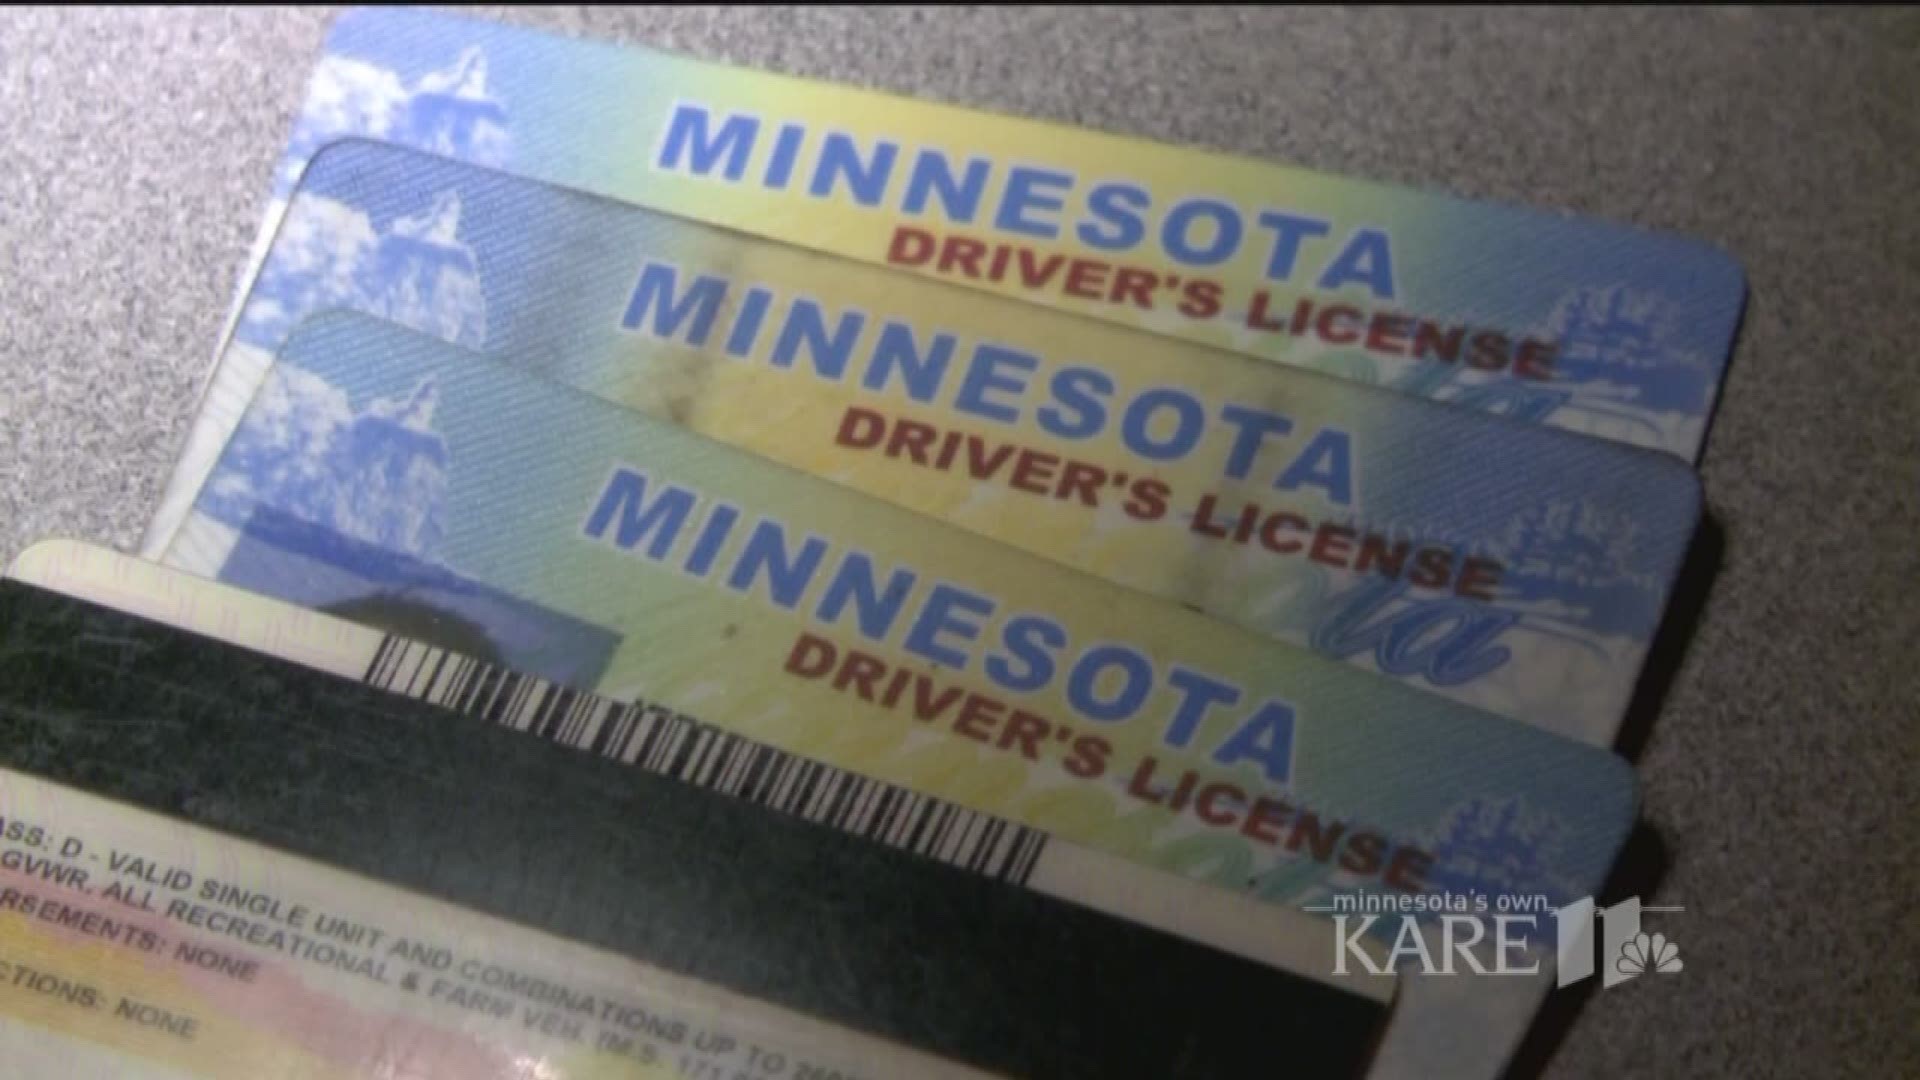 The Real ID bill passed the Minnesota House and is headed to the Senate where it is expected to pass.